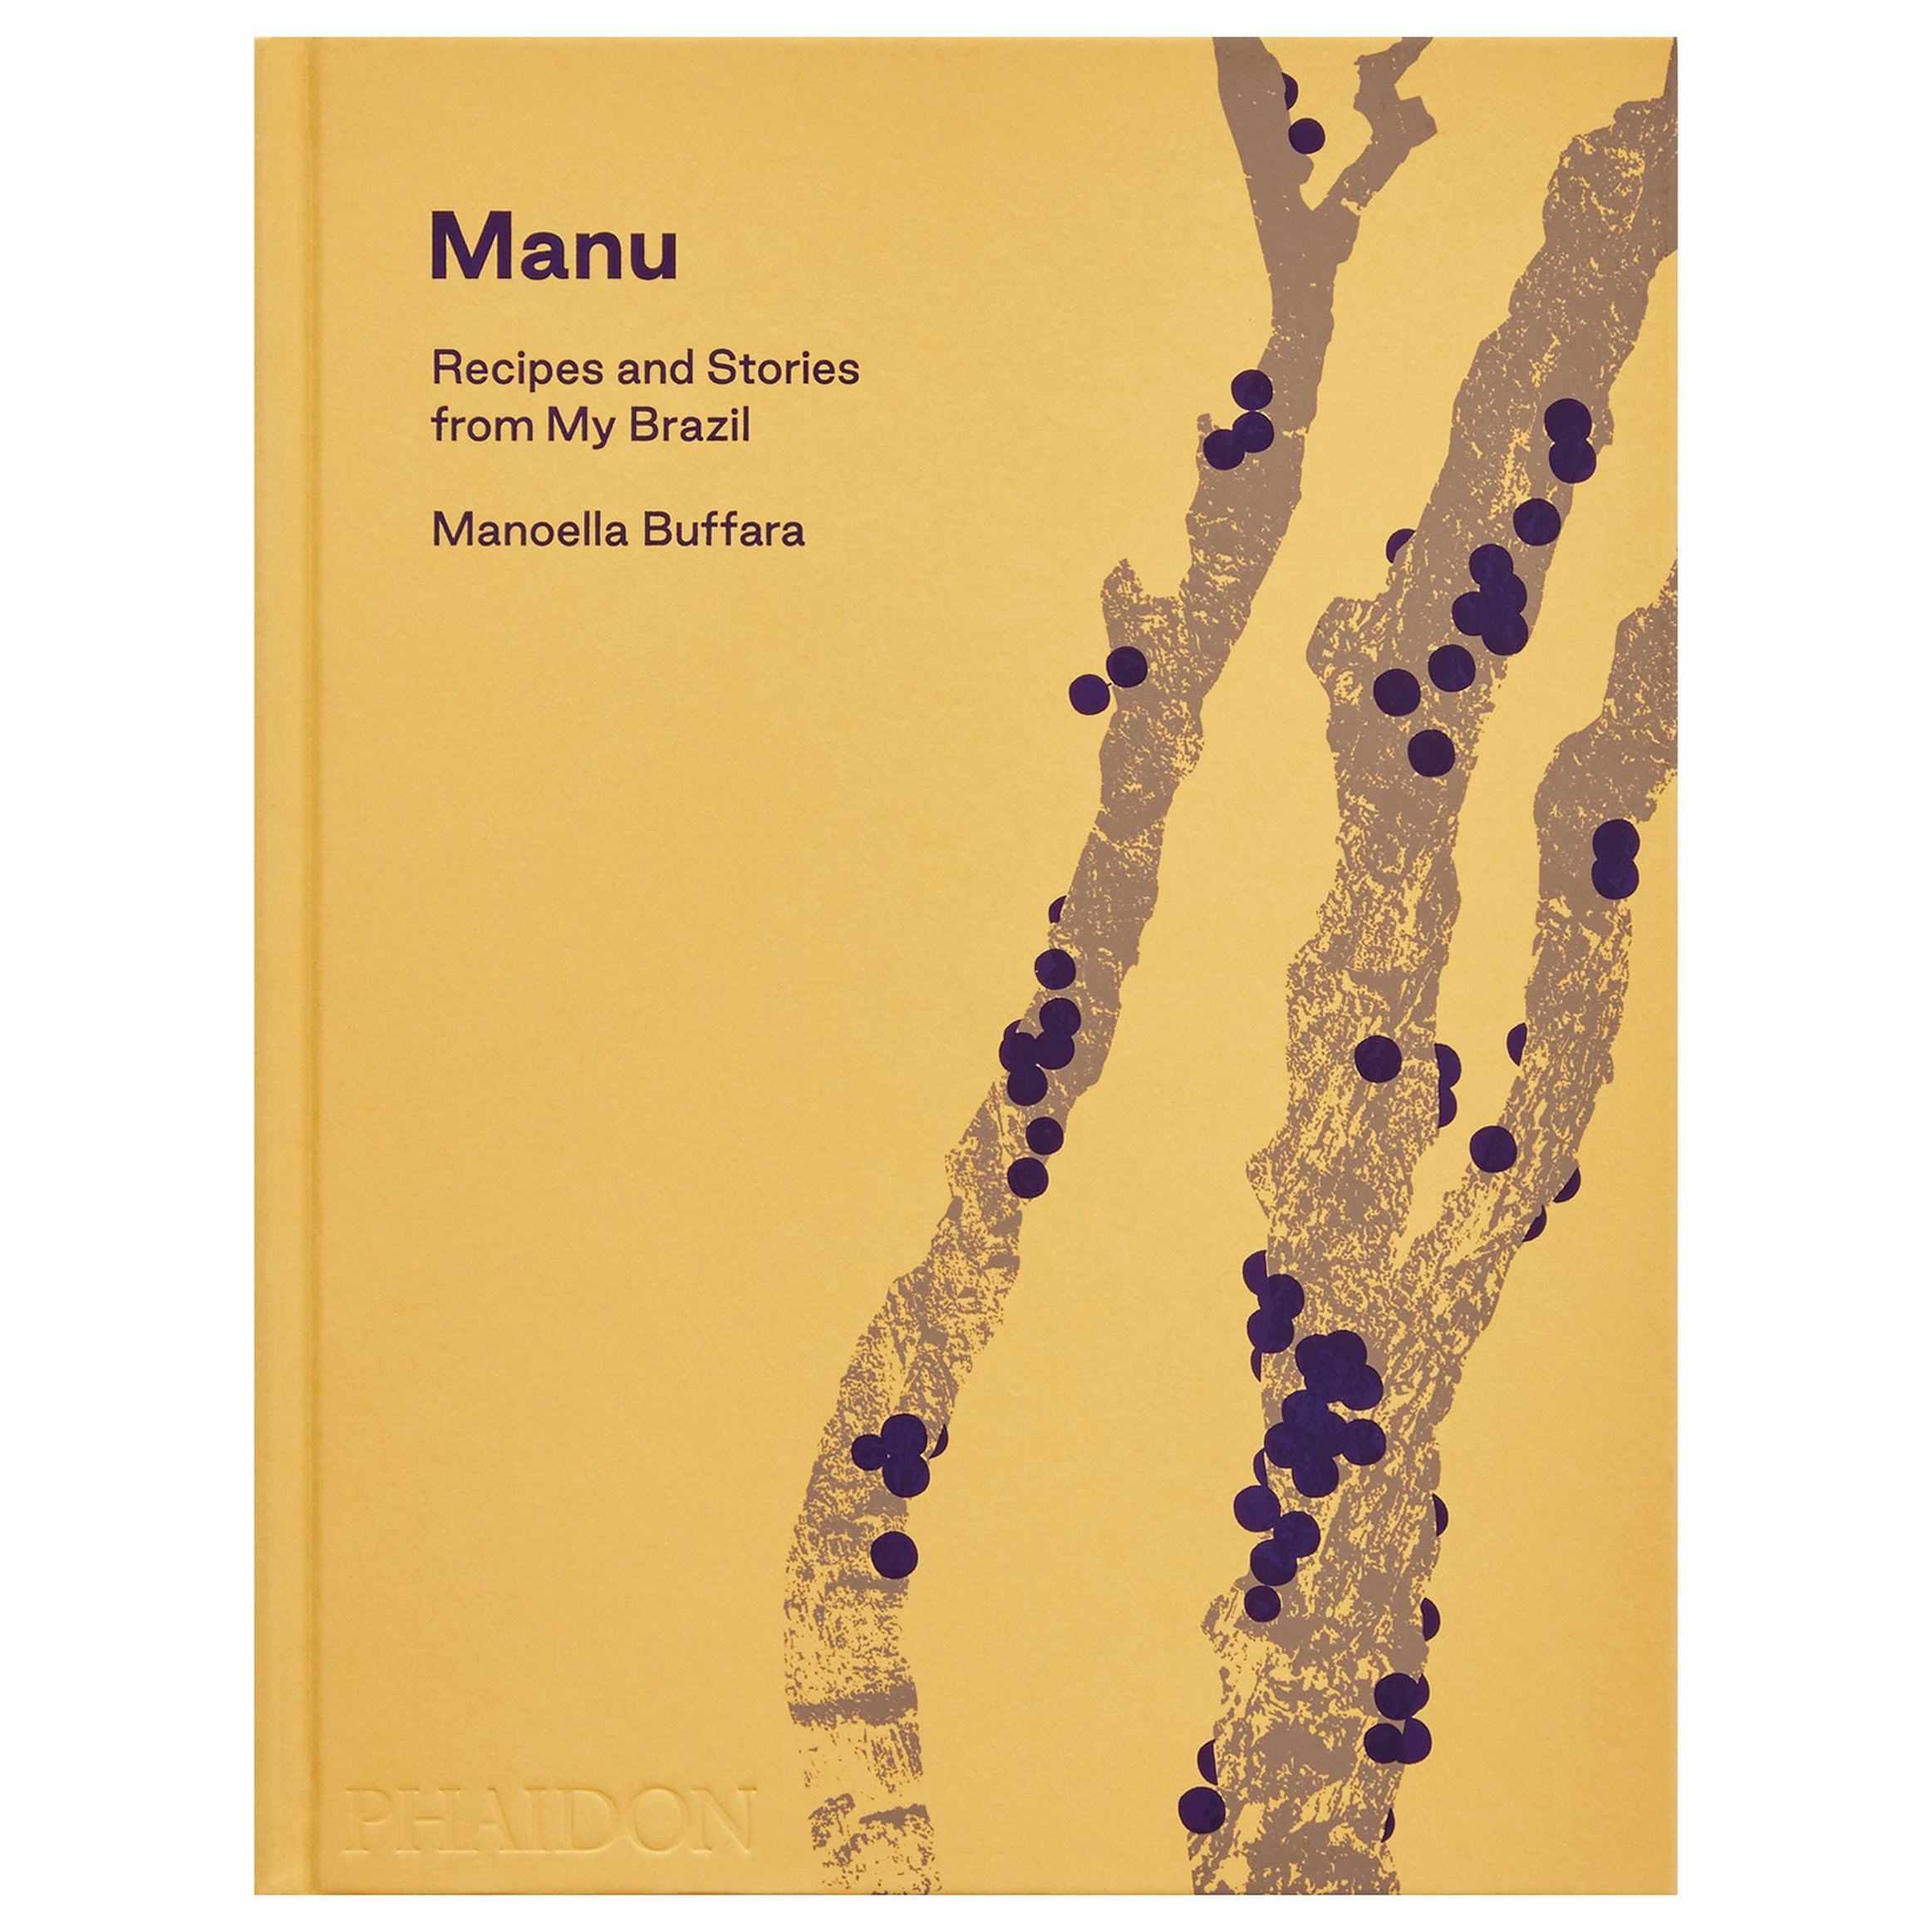 Manu: Recipes and Stories from My Brazi